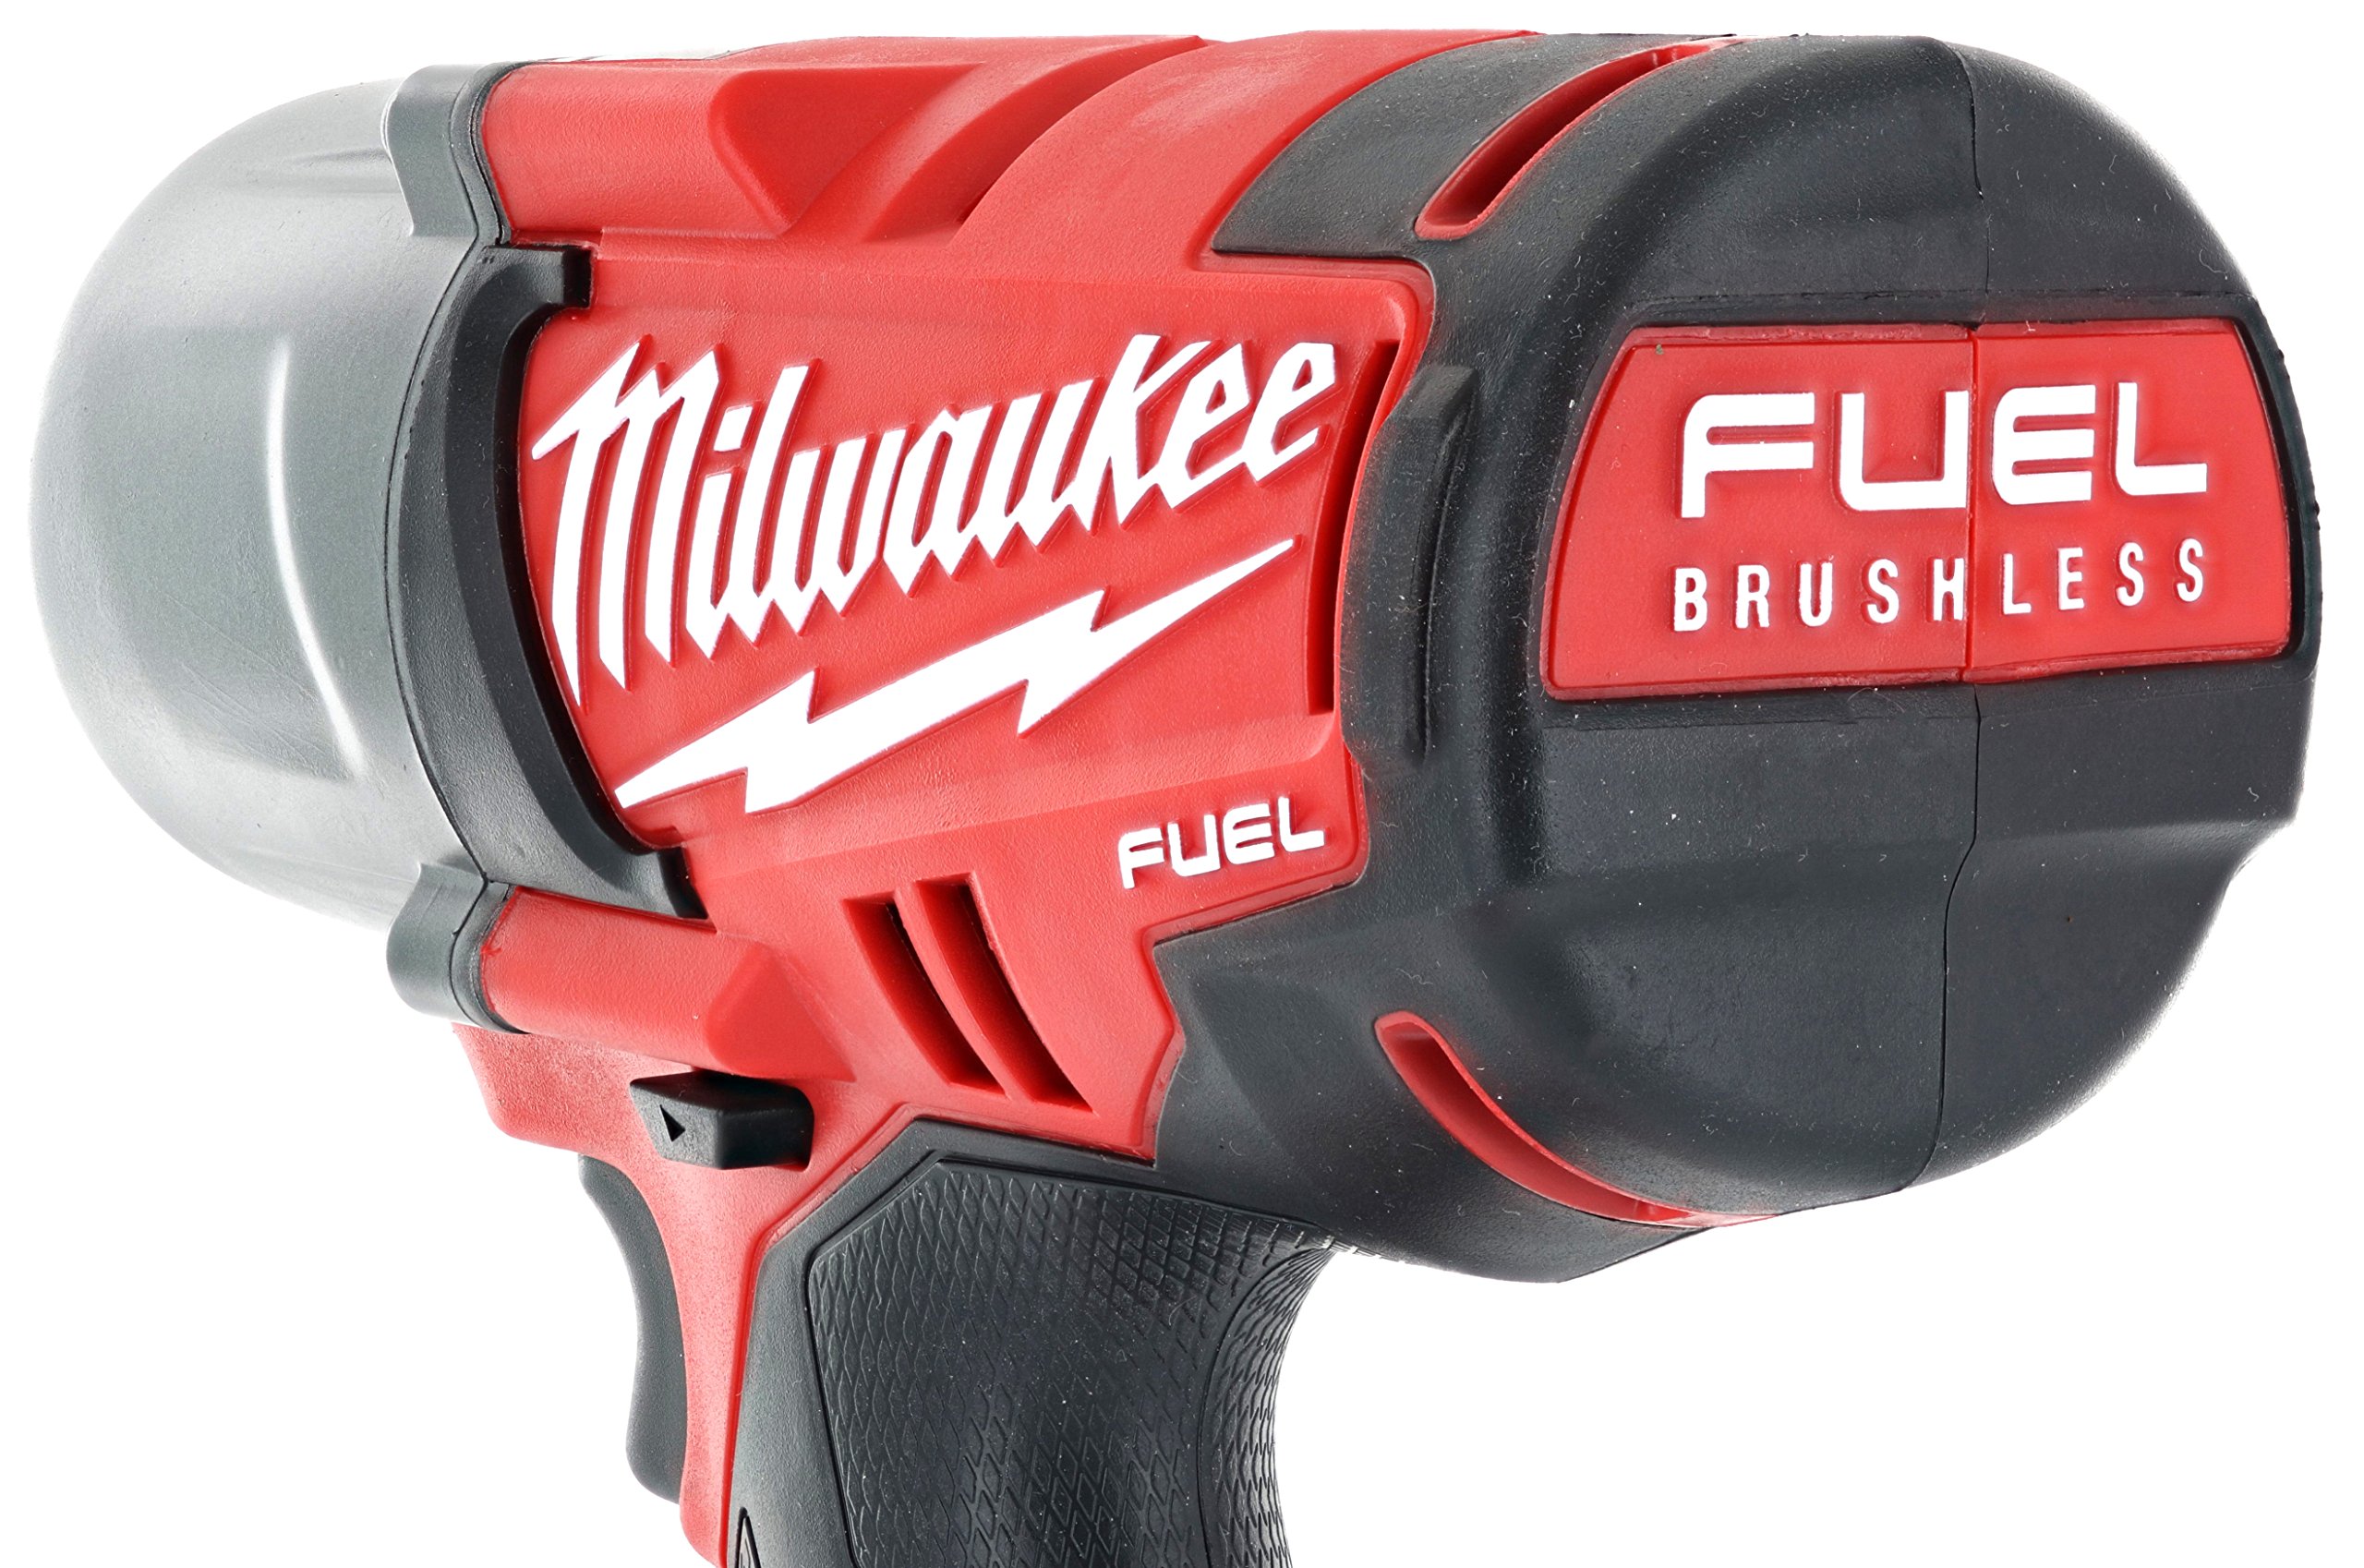 Milwaukee 2763-20 M18 Fuel 1/2-Inch High Torque Impact Wrench with Friction Ring (Bare Tool)